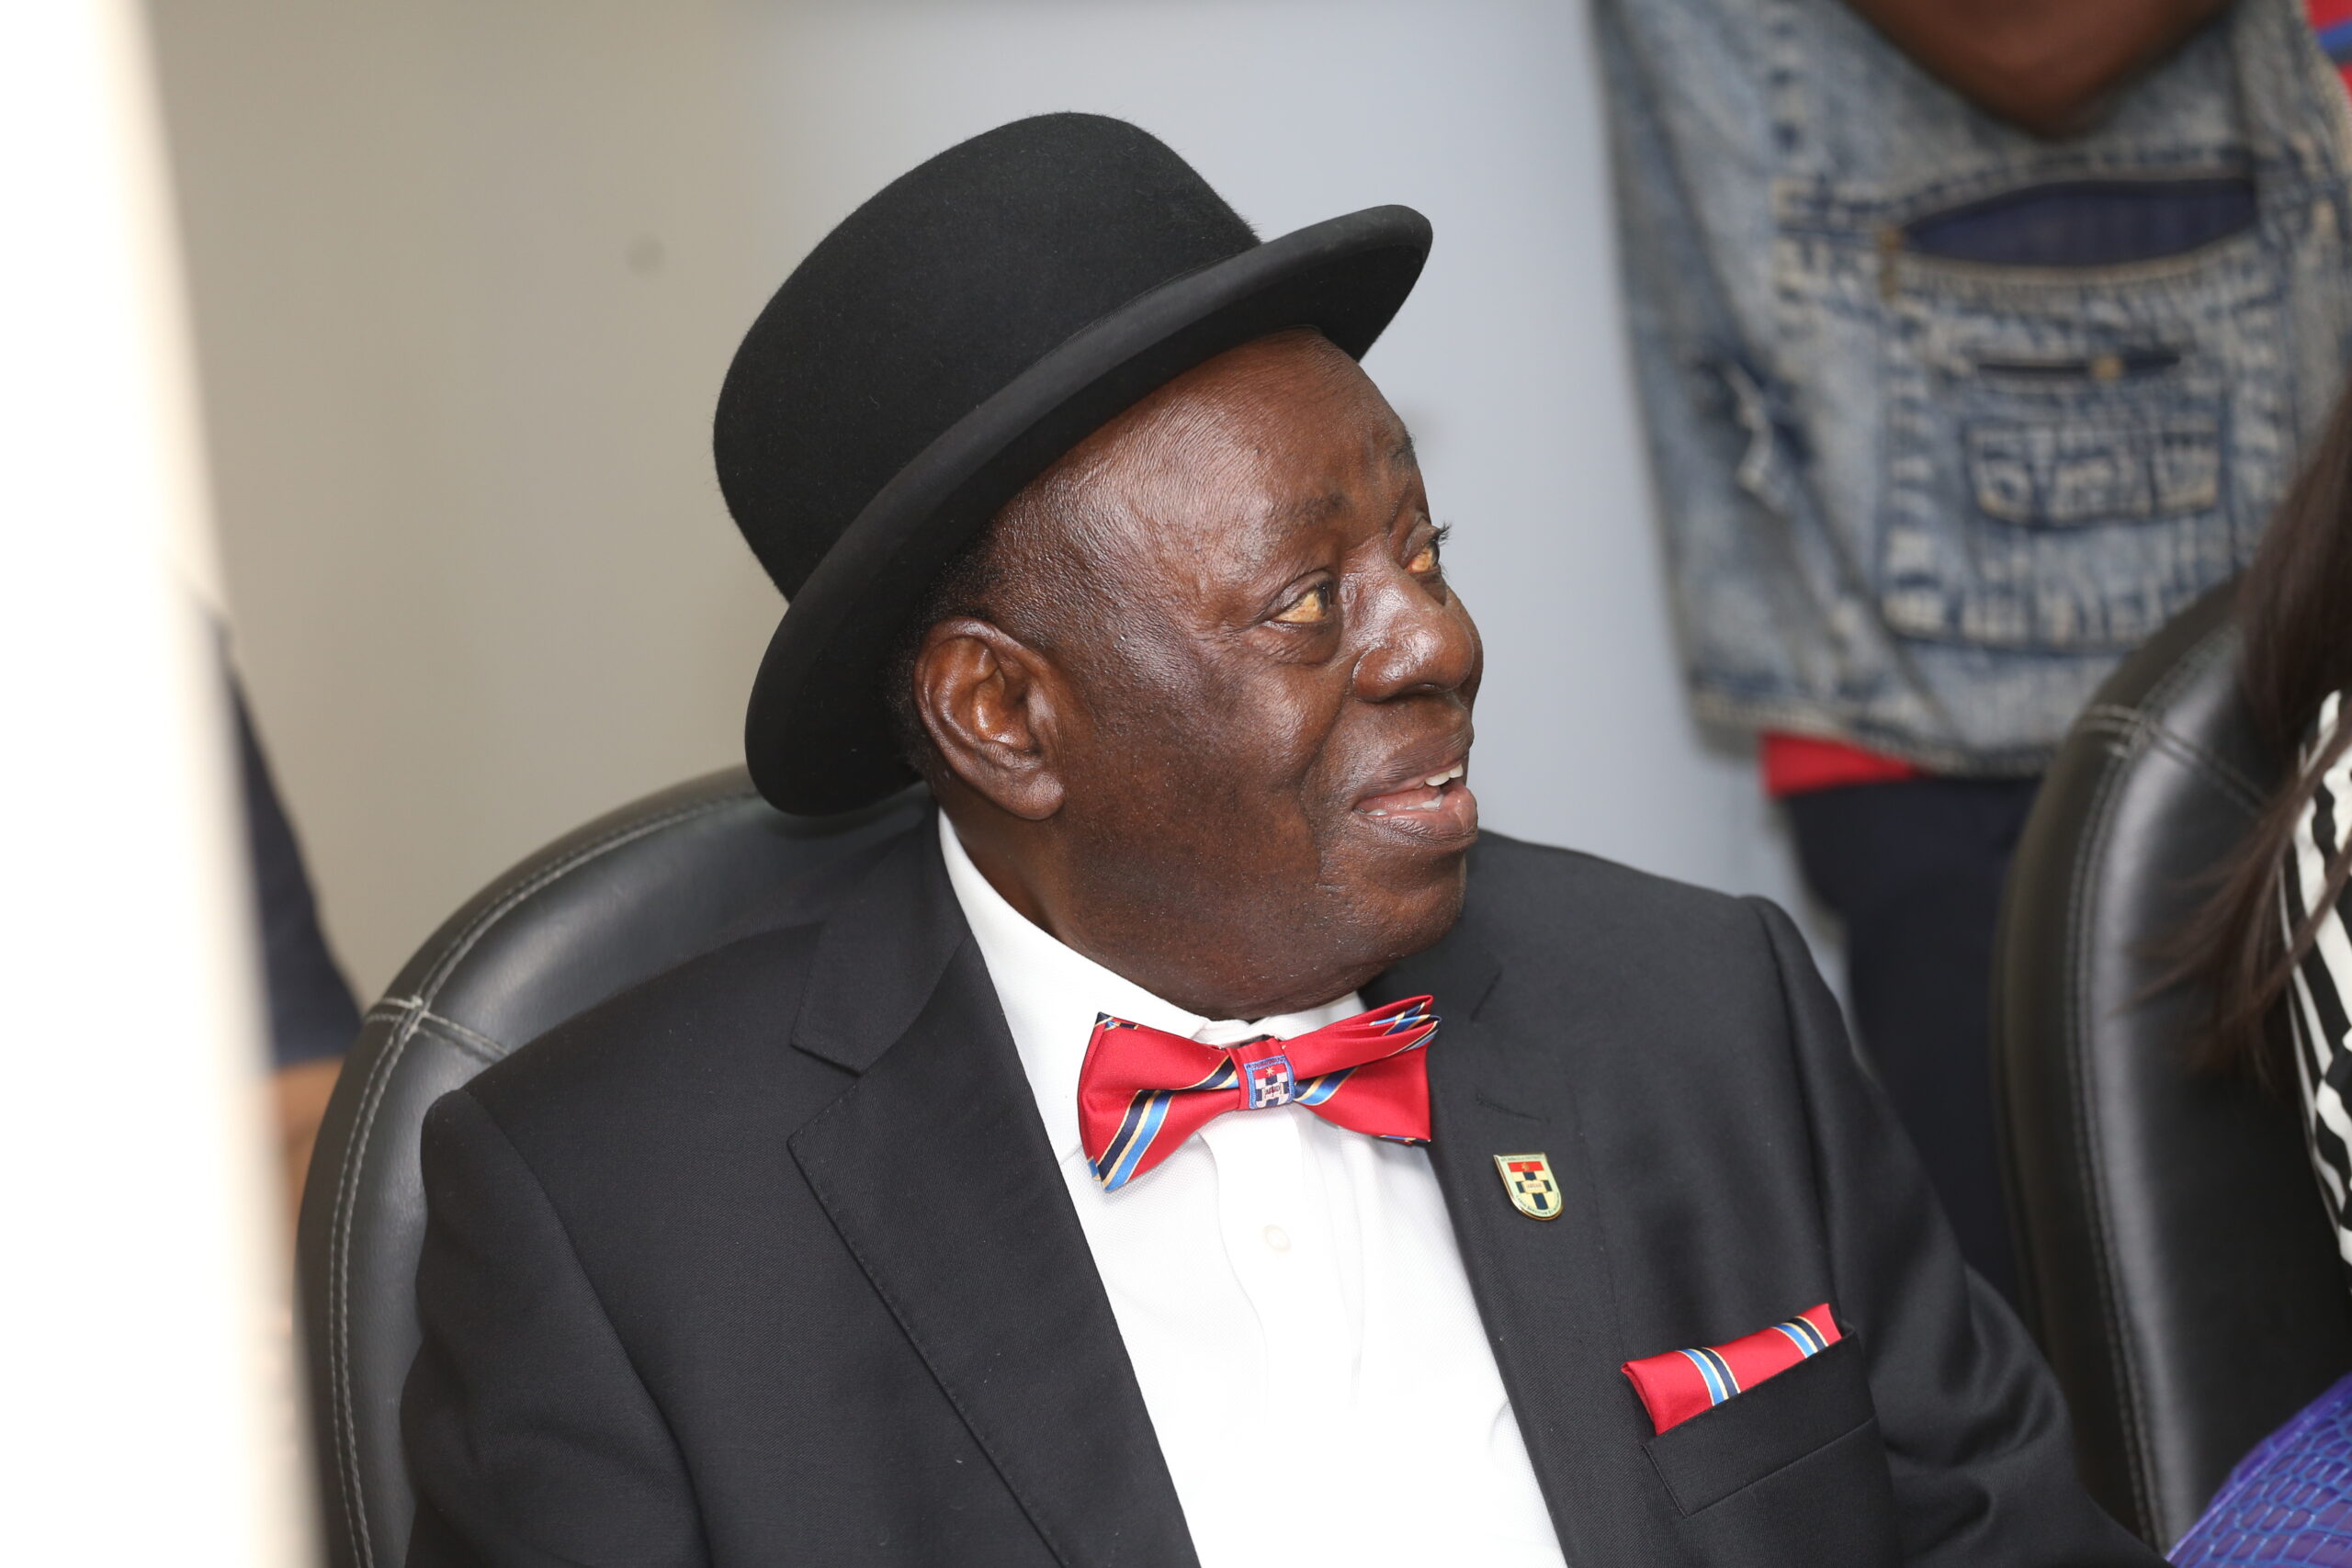 Afe Babalola: An uncommon man, doing uncommon things with uncommon results